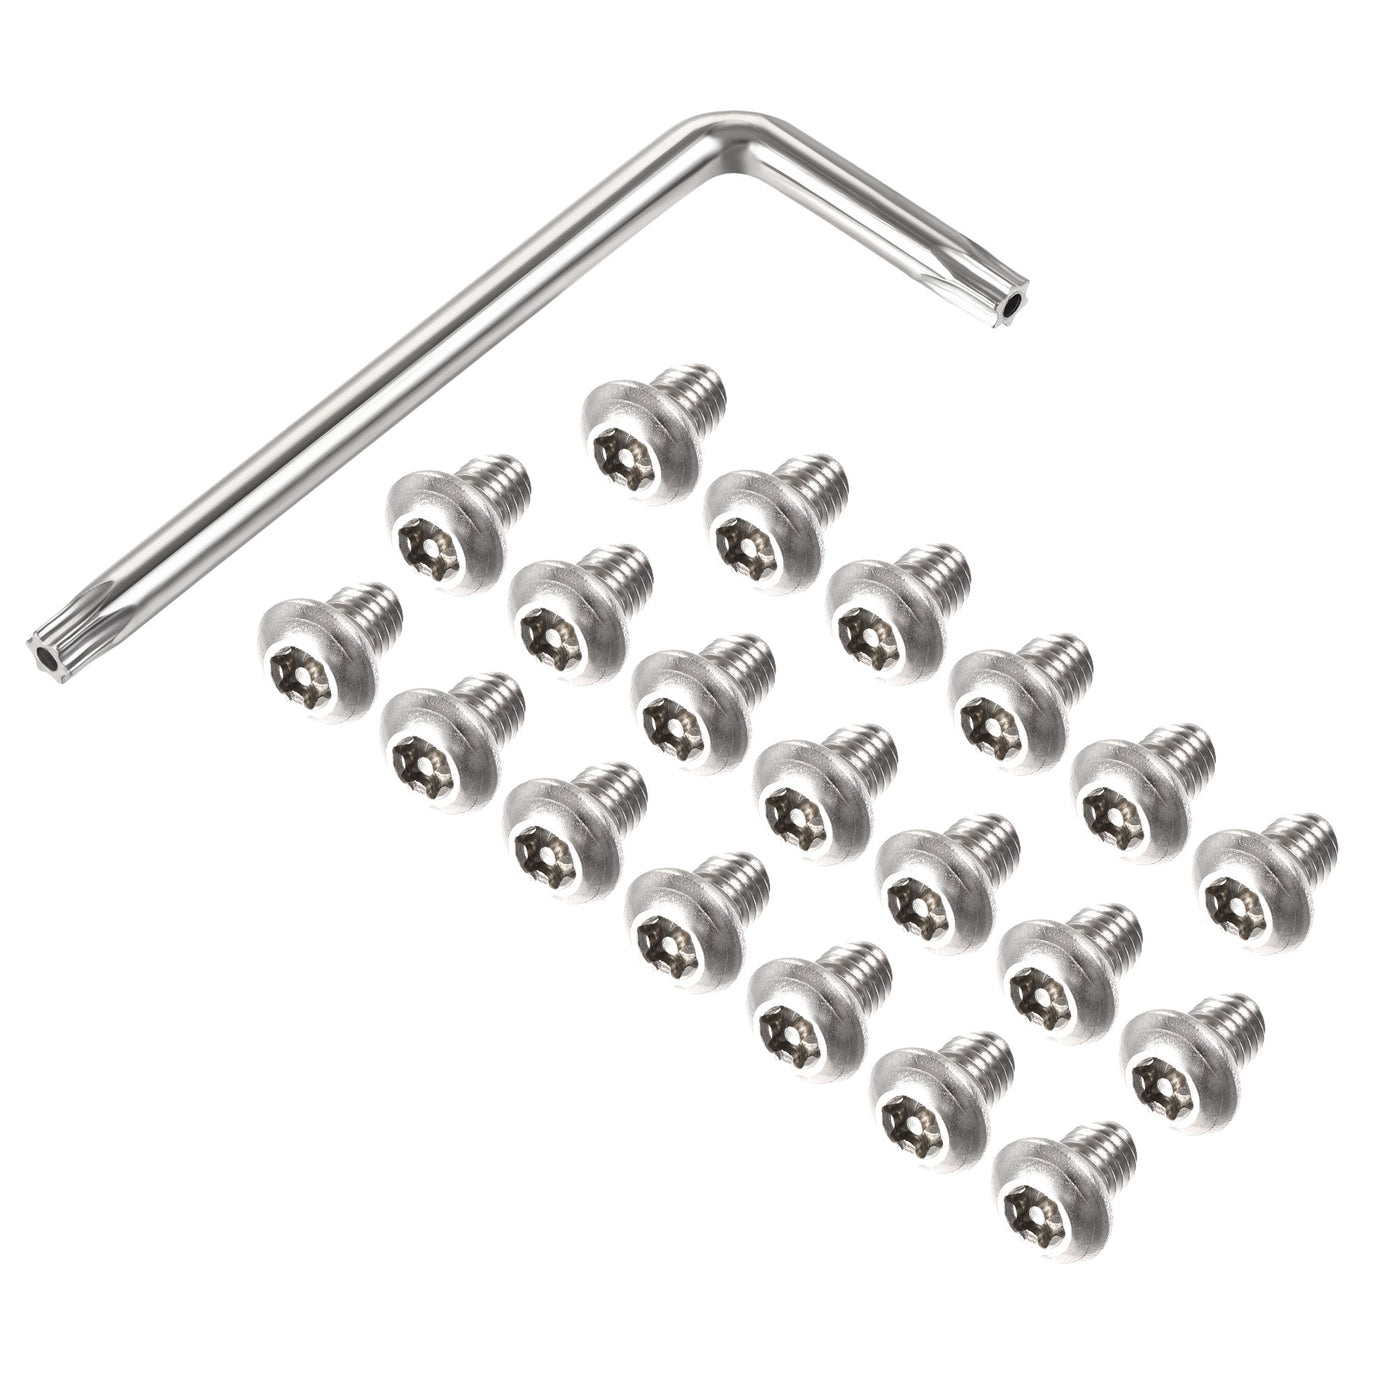 uxcell Uxcell M8x10mm Torx Security Machine Screw, 20pcs Pan Head Screws Inside Column, with T40 L-Type Wrench, 304 Stainless Steel Fasteners Bolts